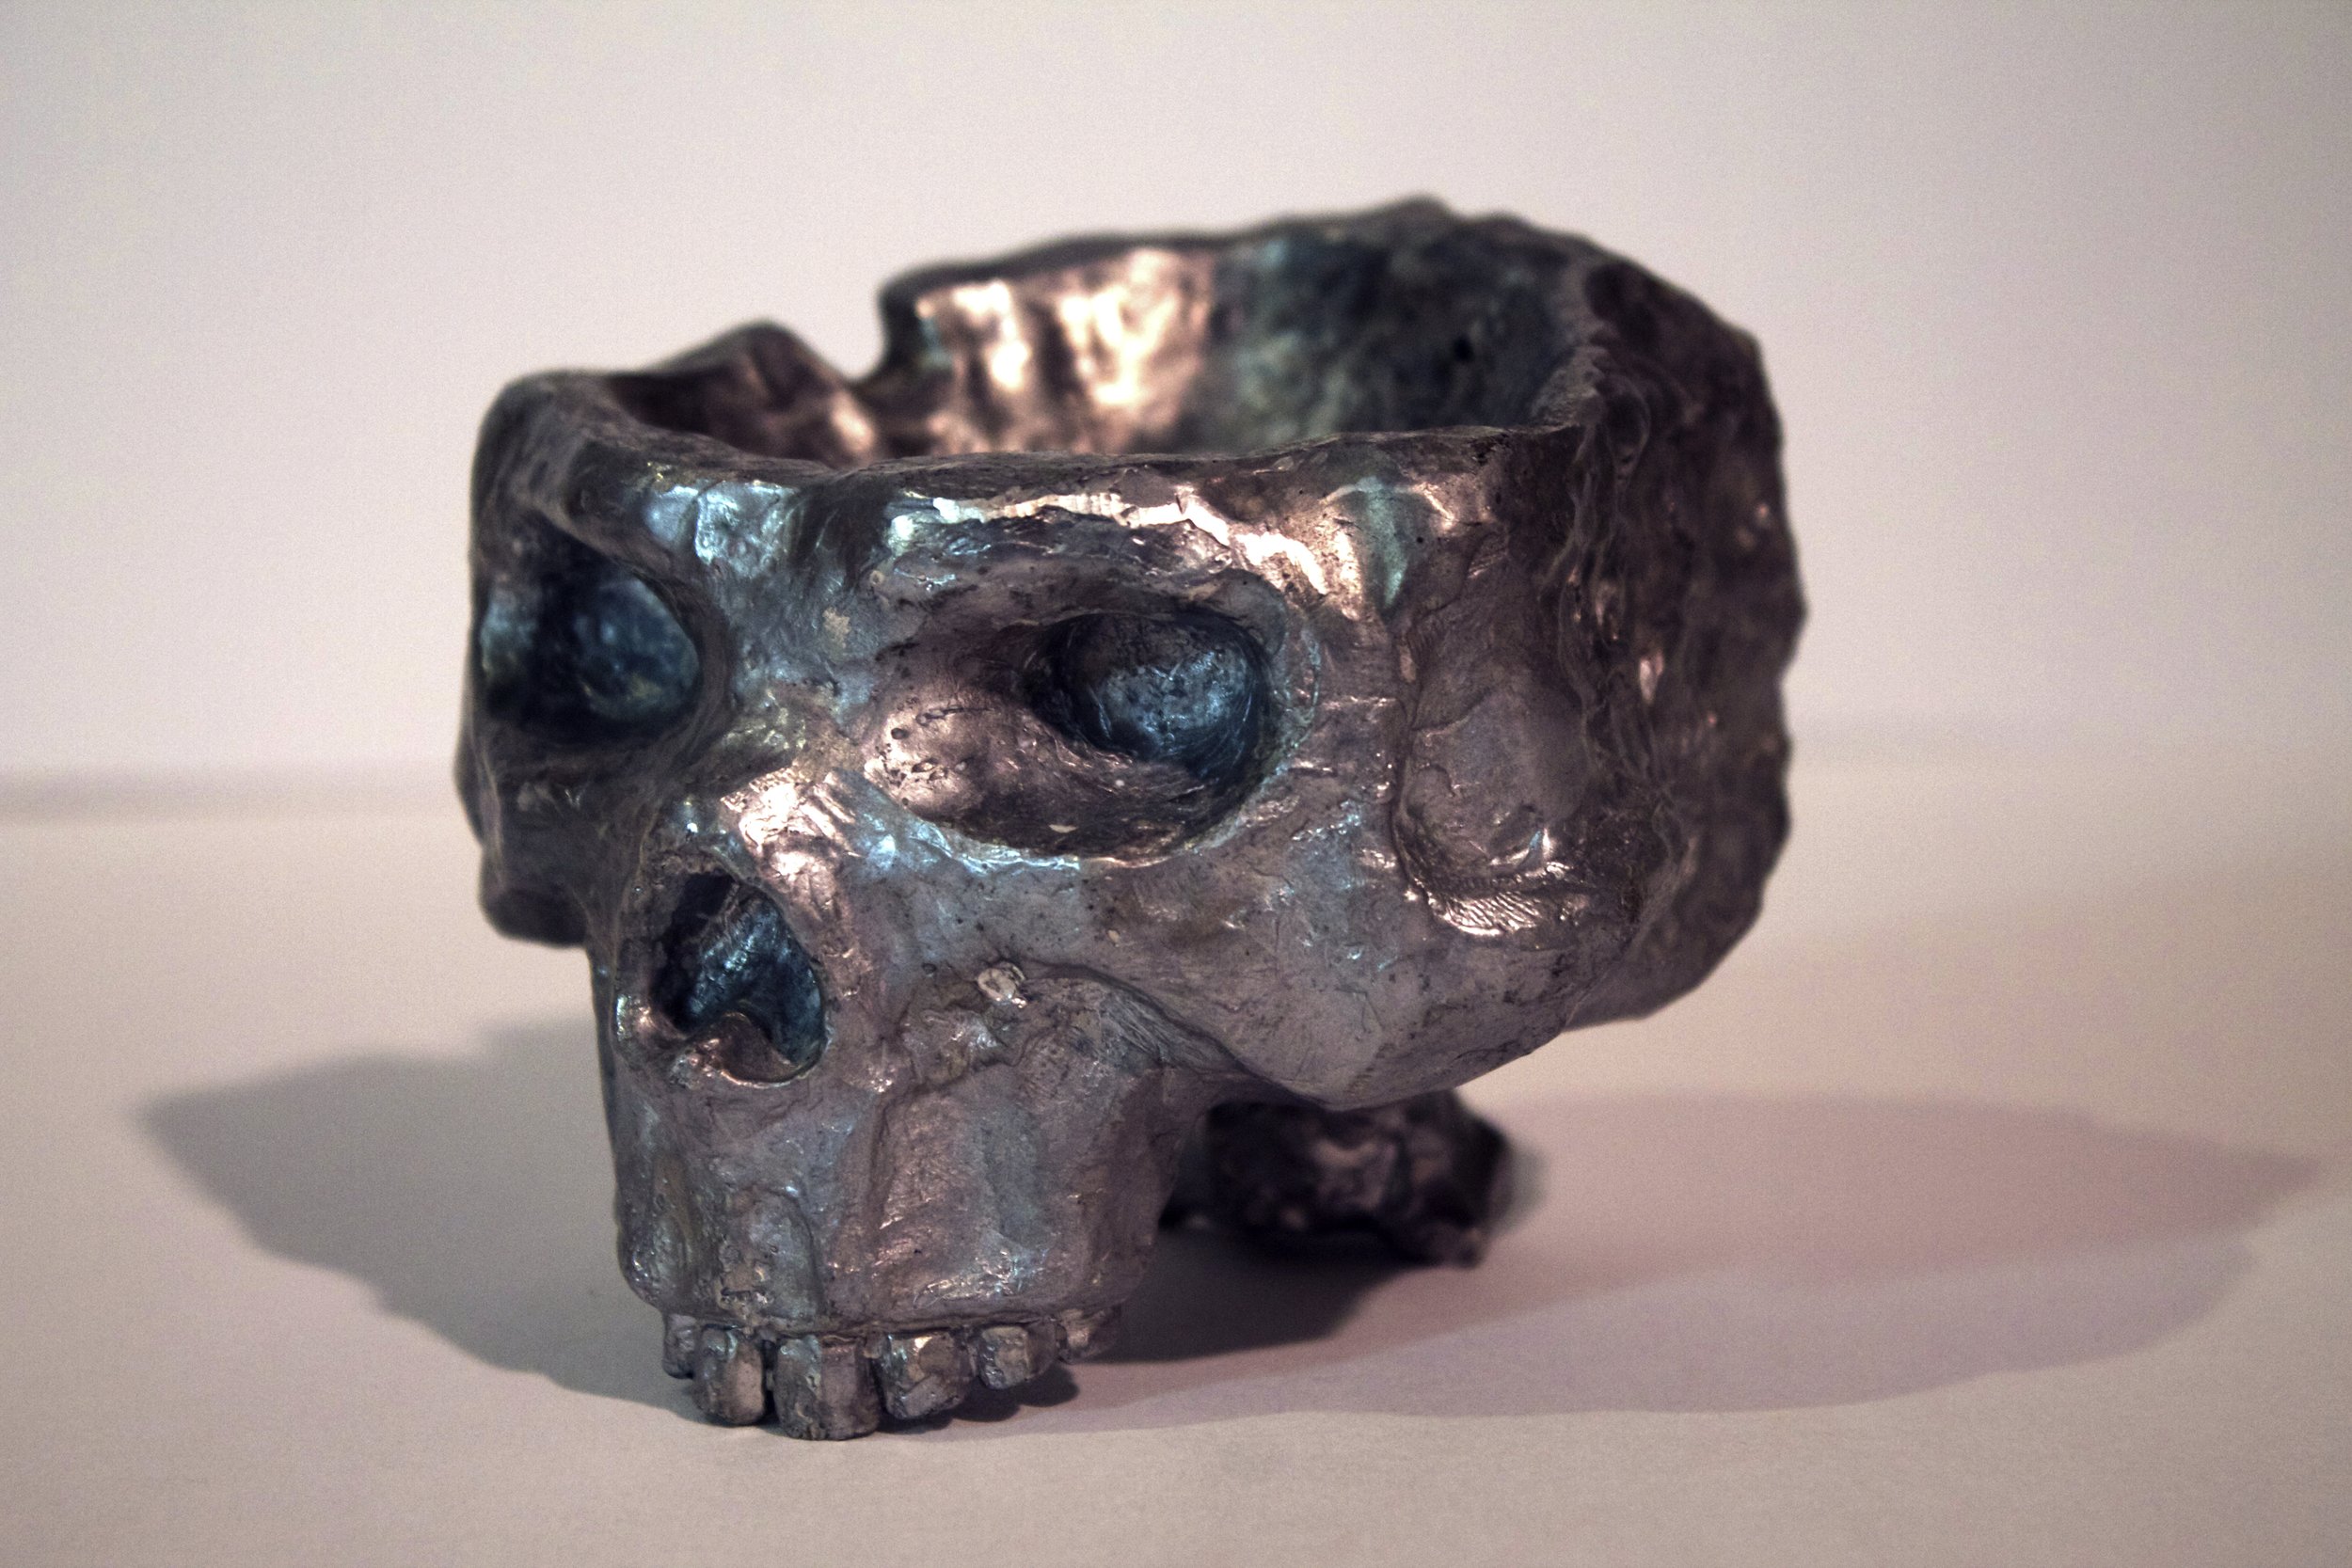   Metal Skull Ashtray  aluminum lost wax cast. 2008  exhibited -  Bailey Contemporary Arts during Anything And Everything From The Past 2022; Mac B. Sarasota FL 2008  